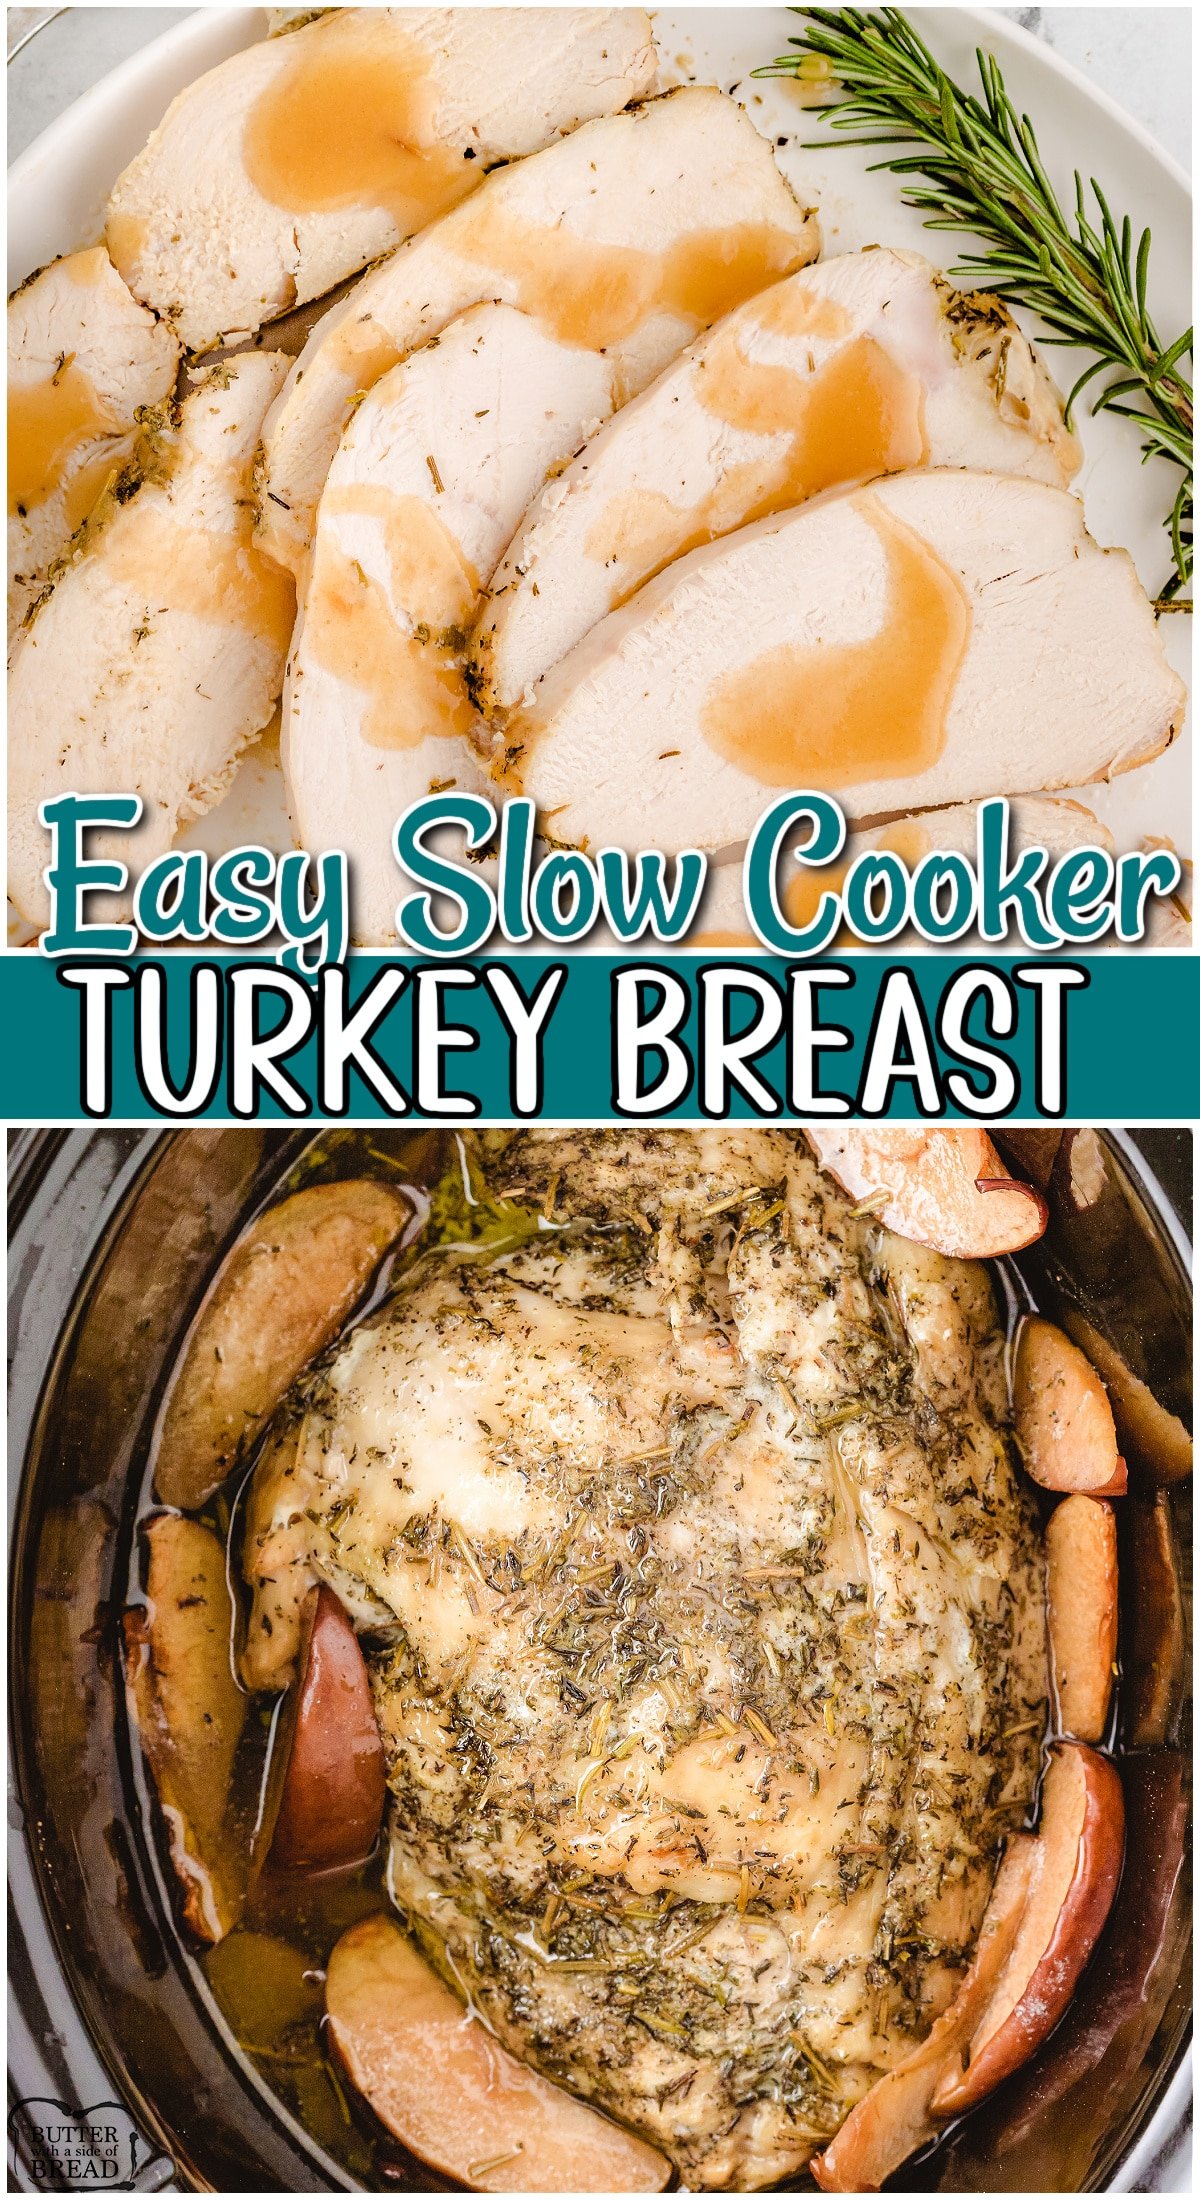 Easy Slow Cooker Turkey Breast made juicy & flavorful with butter, apple & a delicious mix of traditional seasonings. This crock pot turkey breast recipe is perfect for holidays or any time of the year!